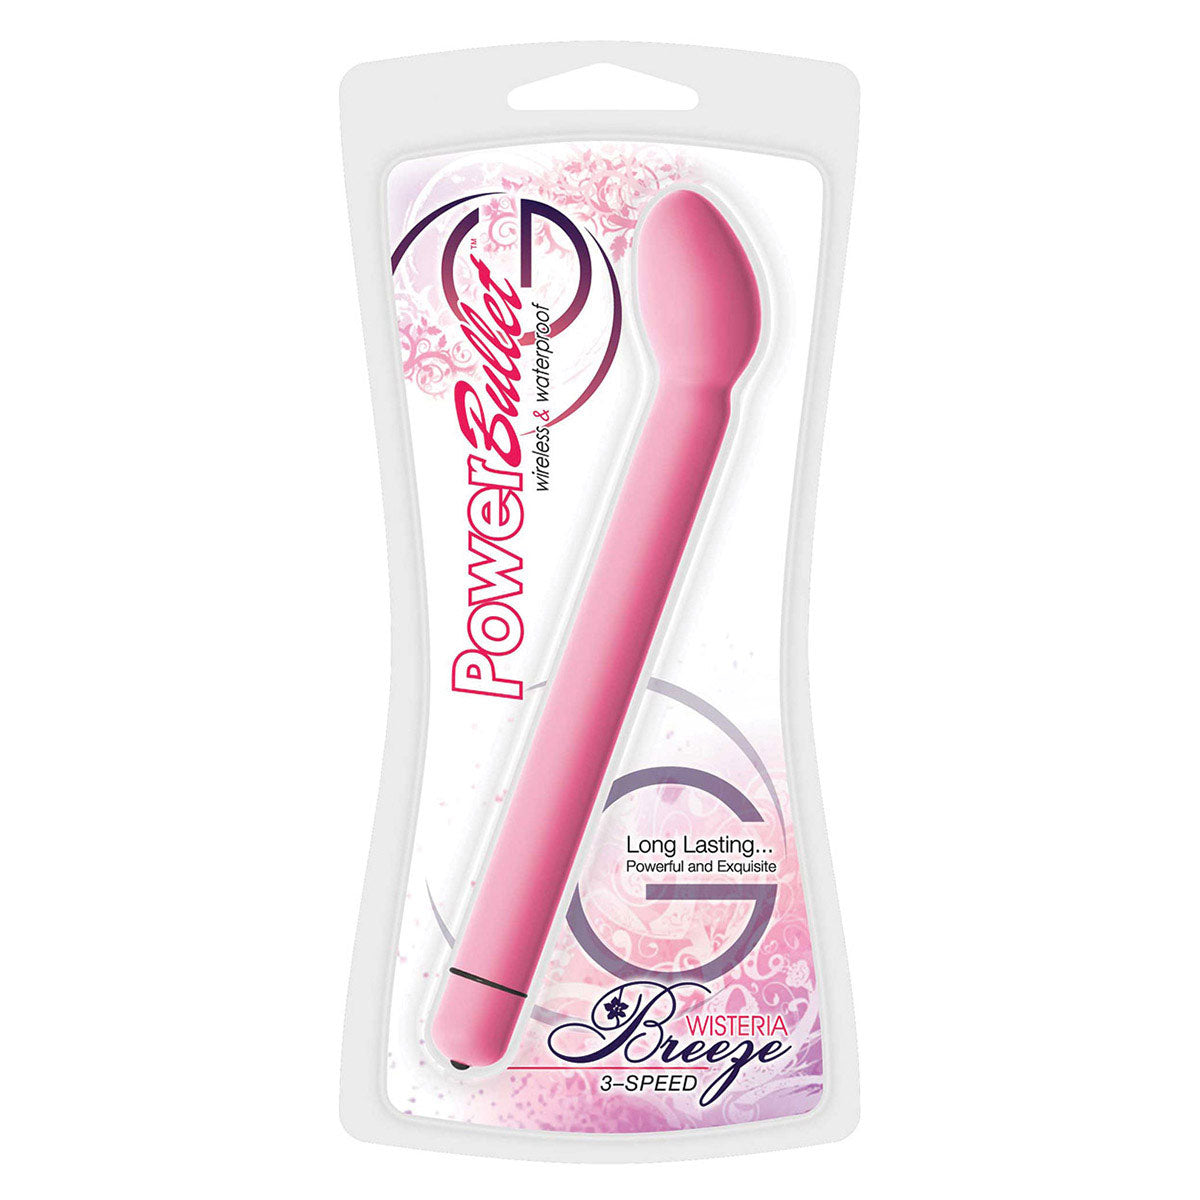 BMS Breeze Power Bullet Wisteria G 3-Speed Curved Bullet Vibrator Pink